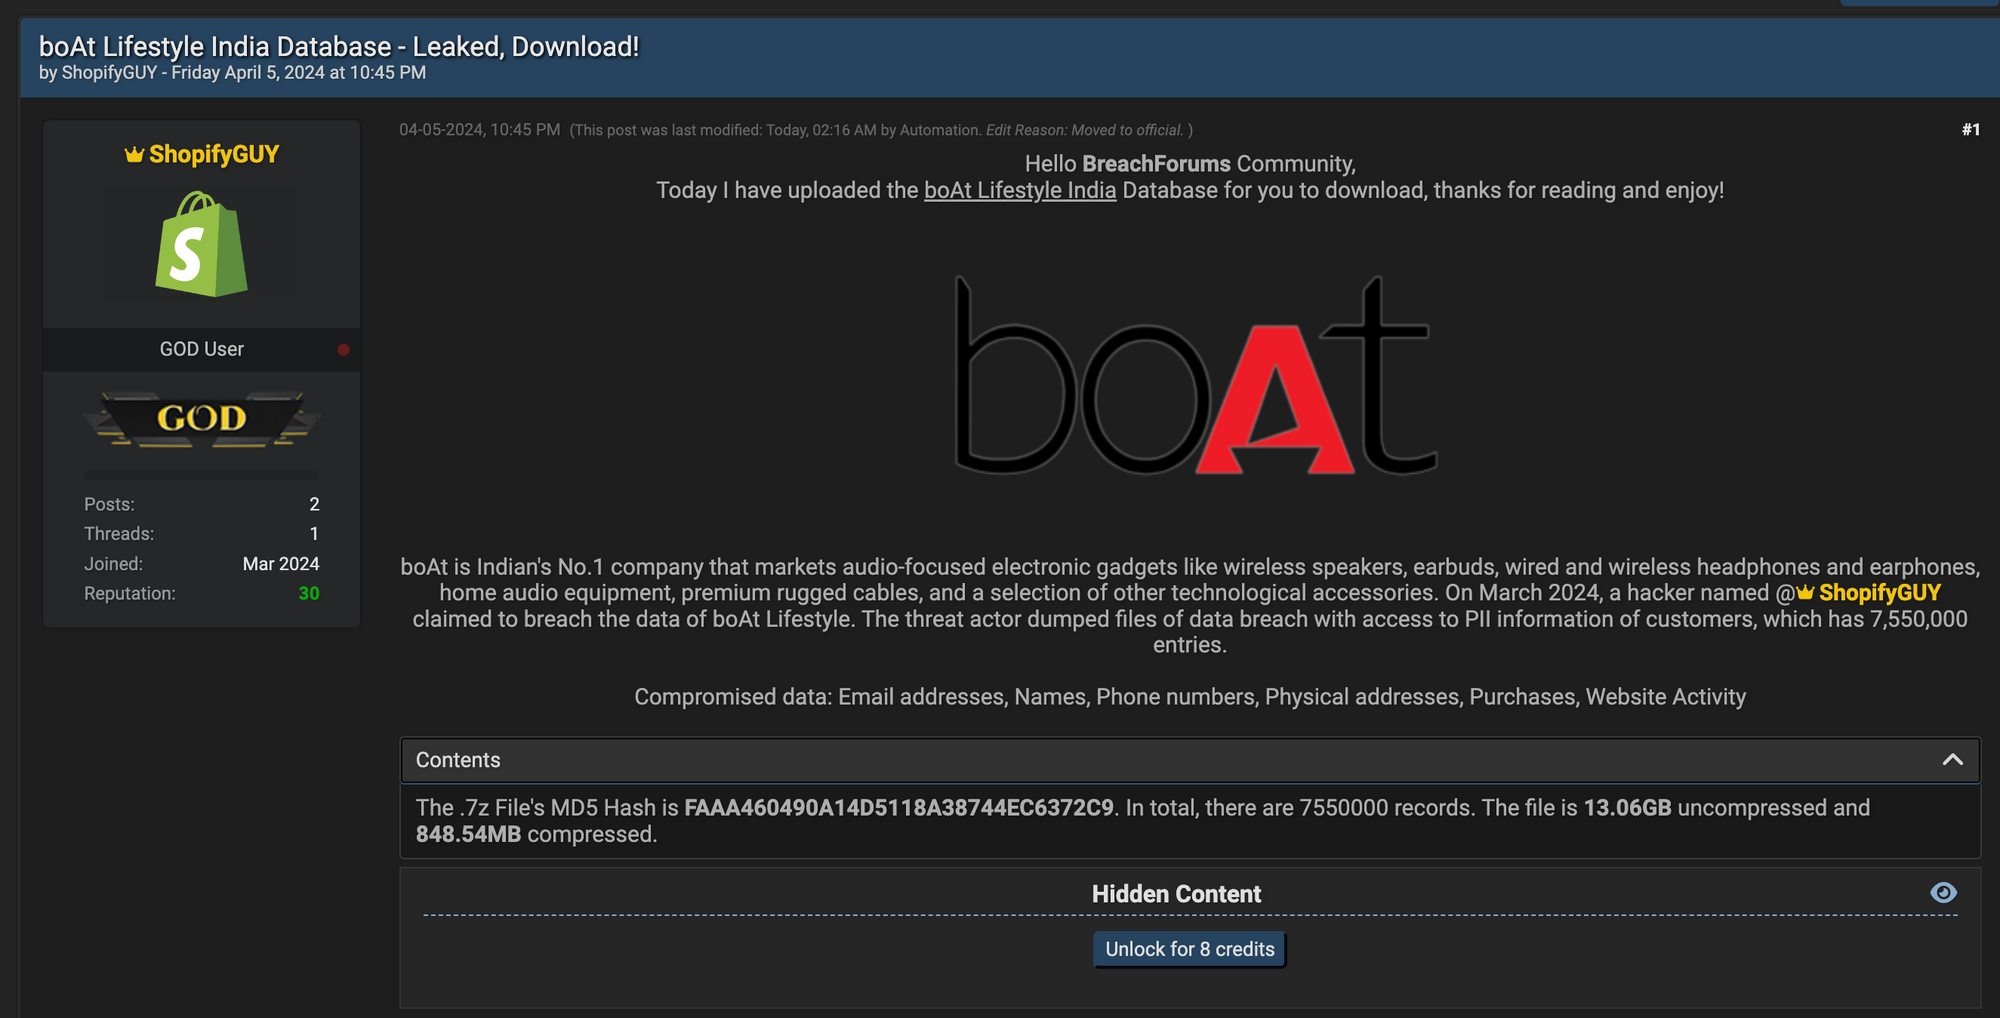 The post about Boat data breach on a hacker forum. (